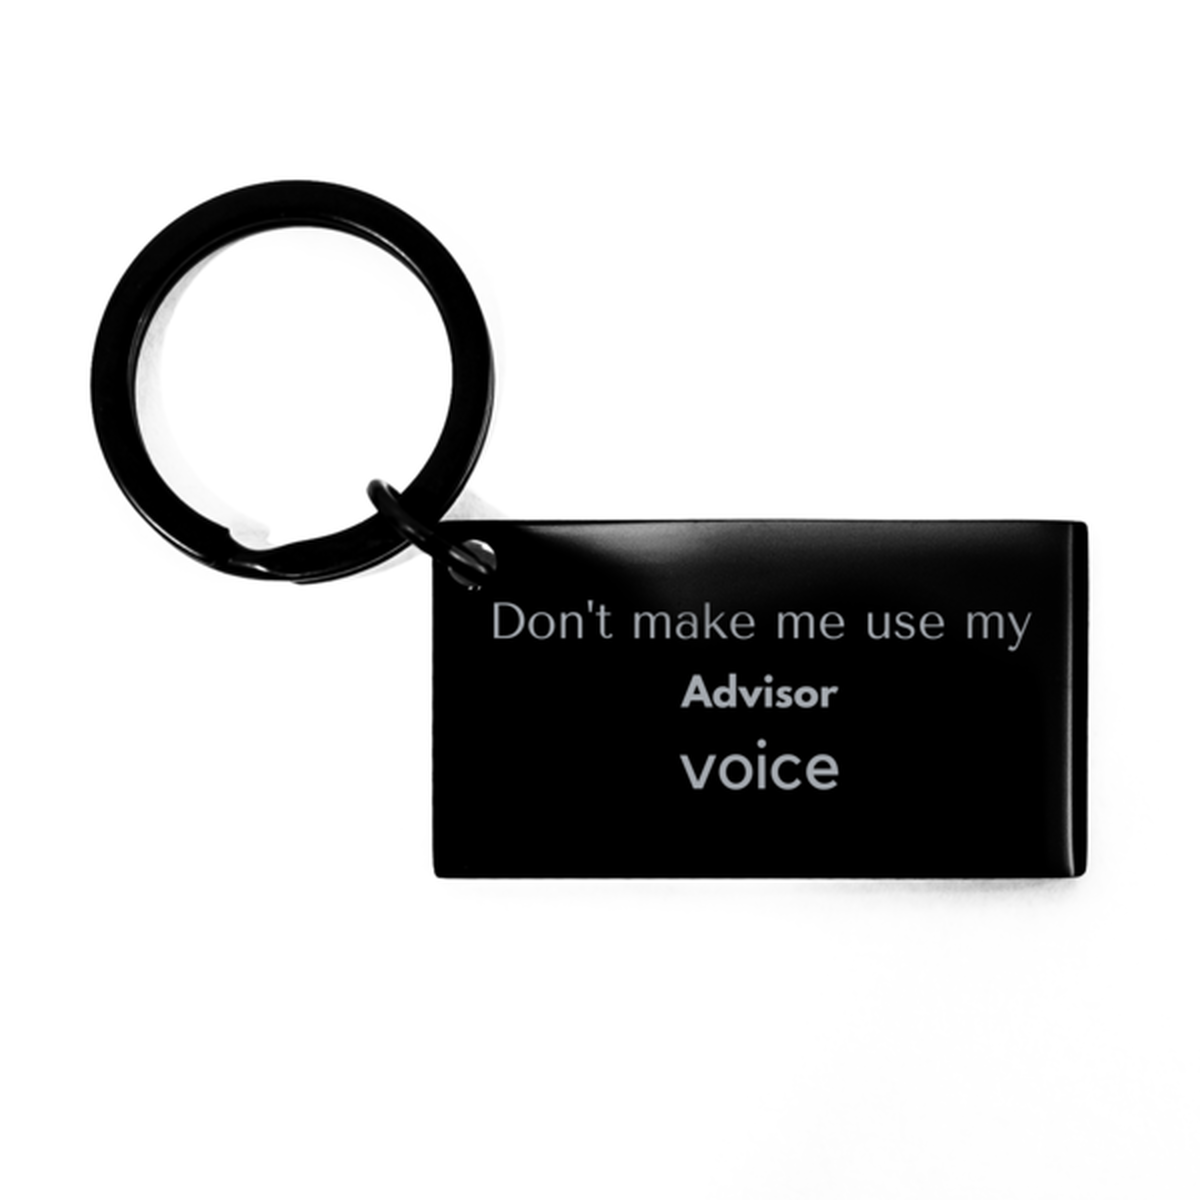 Don't make me use my Advisor voice, Sarcasm Advisor Gifts, Christmas Advisor Keychain Birthday Unique Gifts For Advisor Coworkers, Men, Women, Colleague, Friends